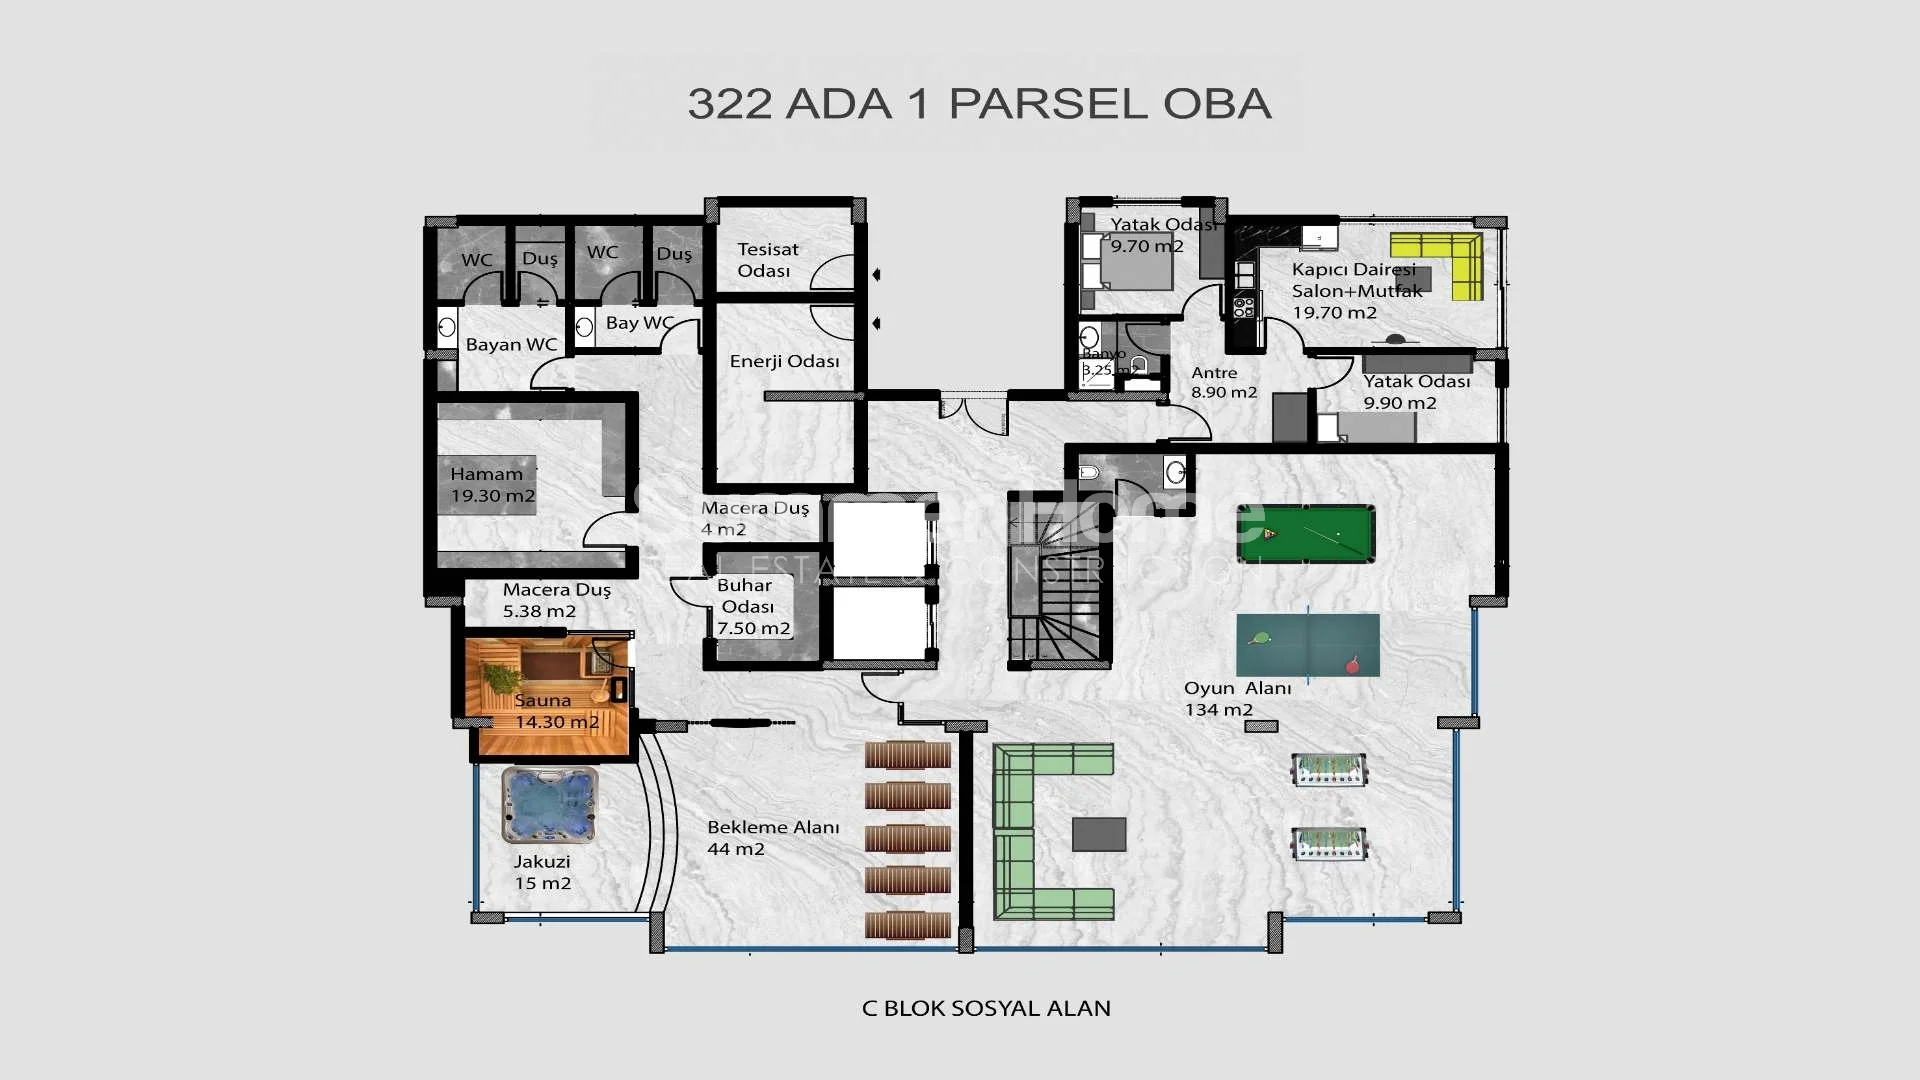 Architecturally Stunning Homes For Sale in Rural Oba Plan - 56